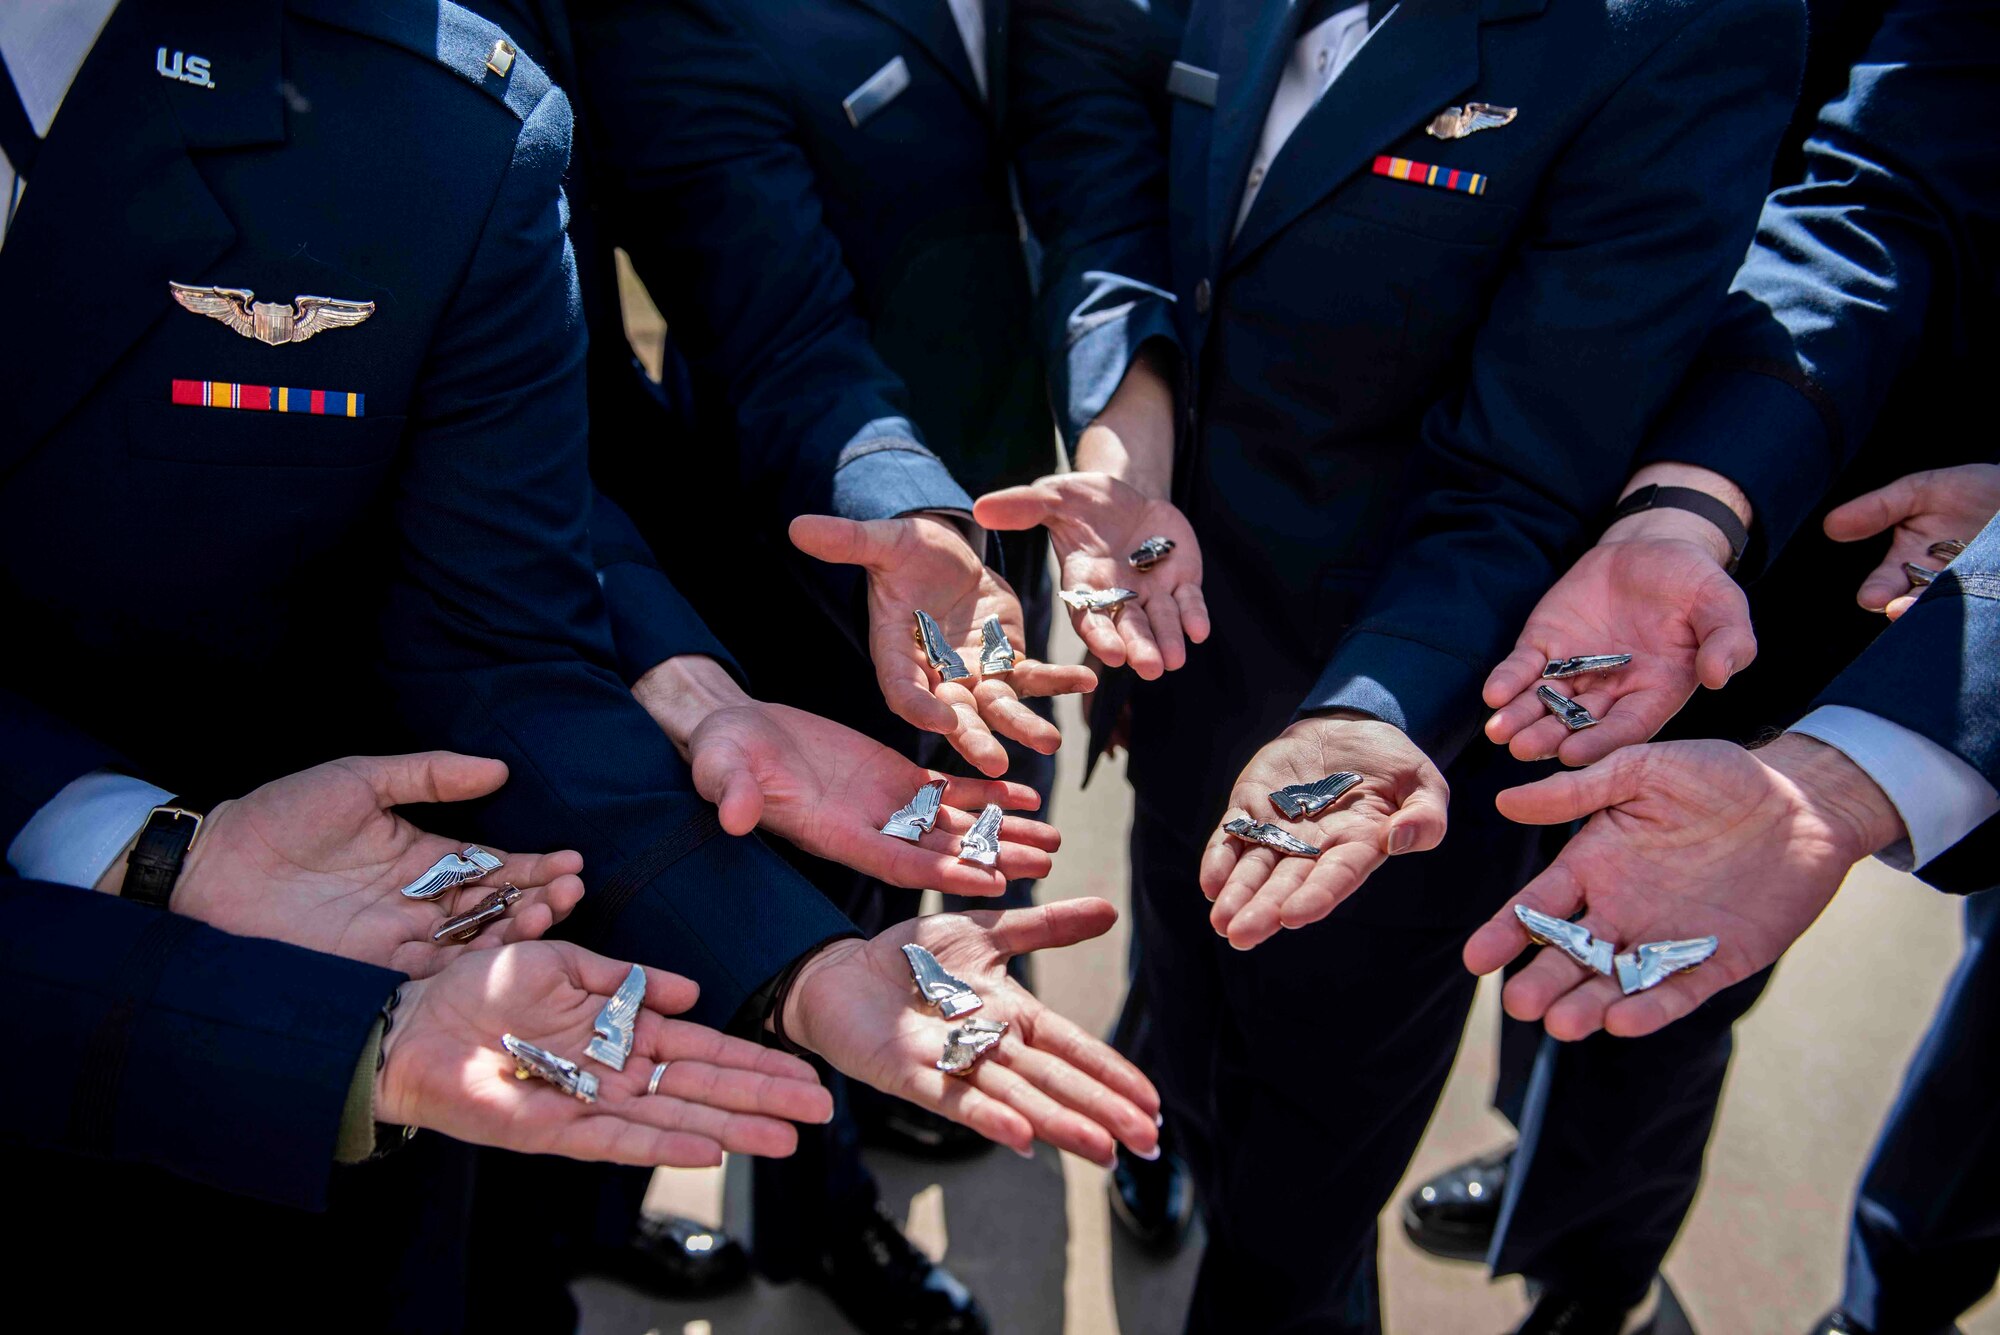 Class 21-06AU graduated April 2 at Vance Air Force Base and soon after, demonstrated a tradition called "breaking of the wings." After breaking the wings, one half stays with the pilot while the other is given to a loved one for safekeeping.